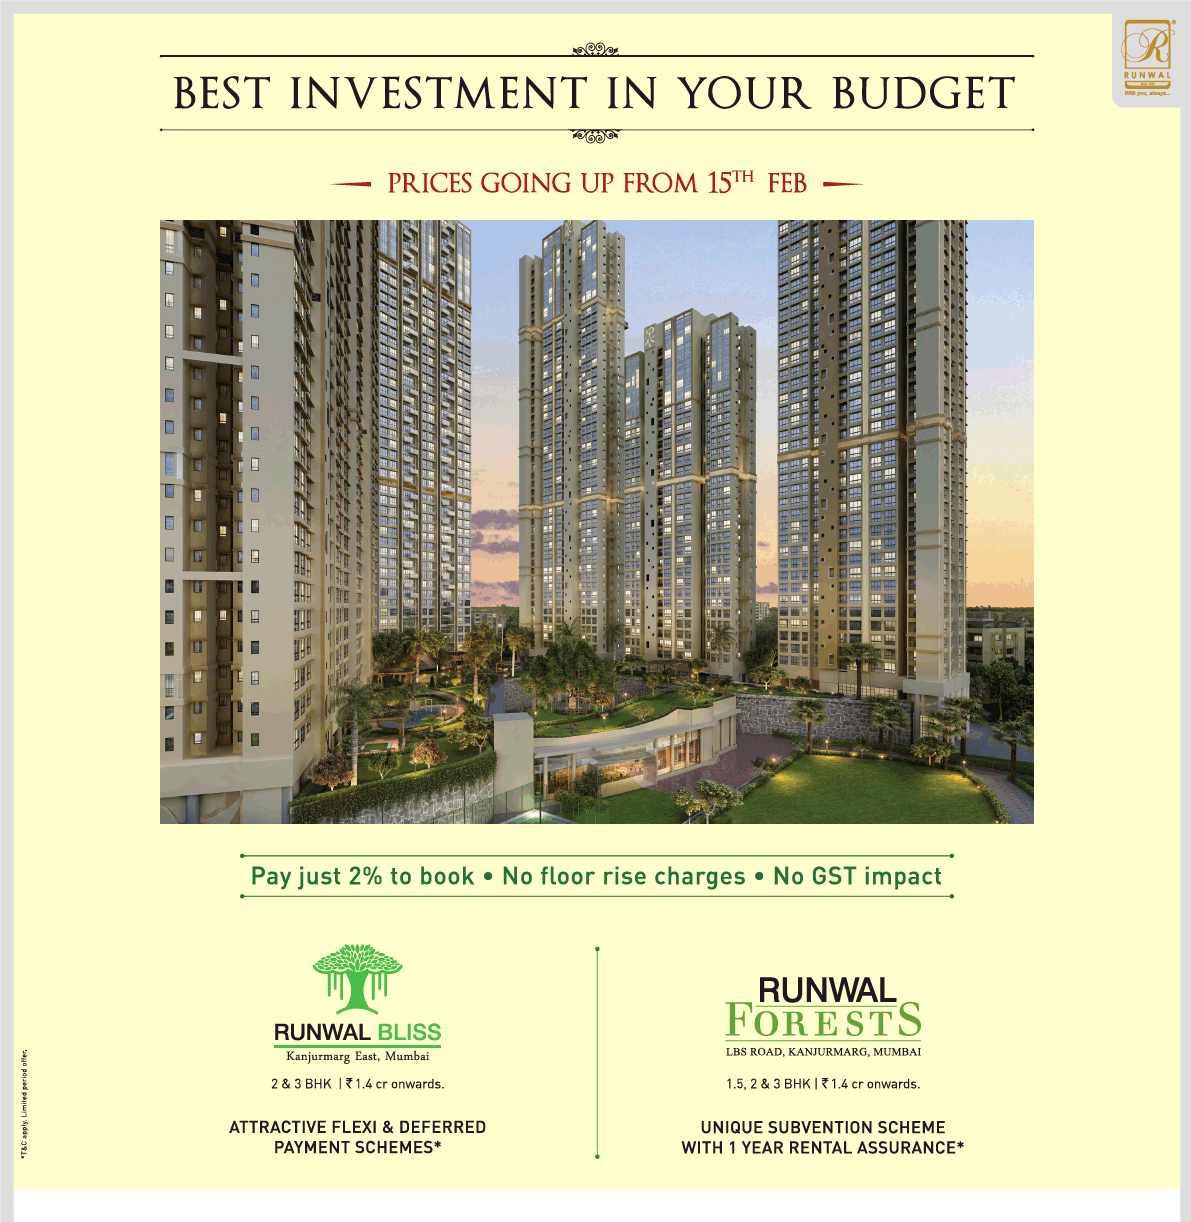 Best investment in your budget at Runwal Properties in Mumbai Update